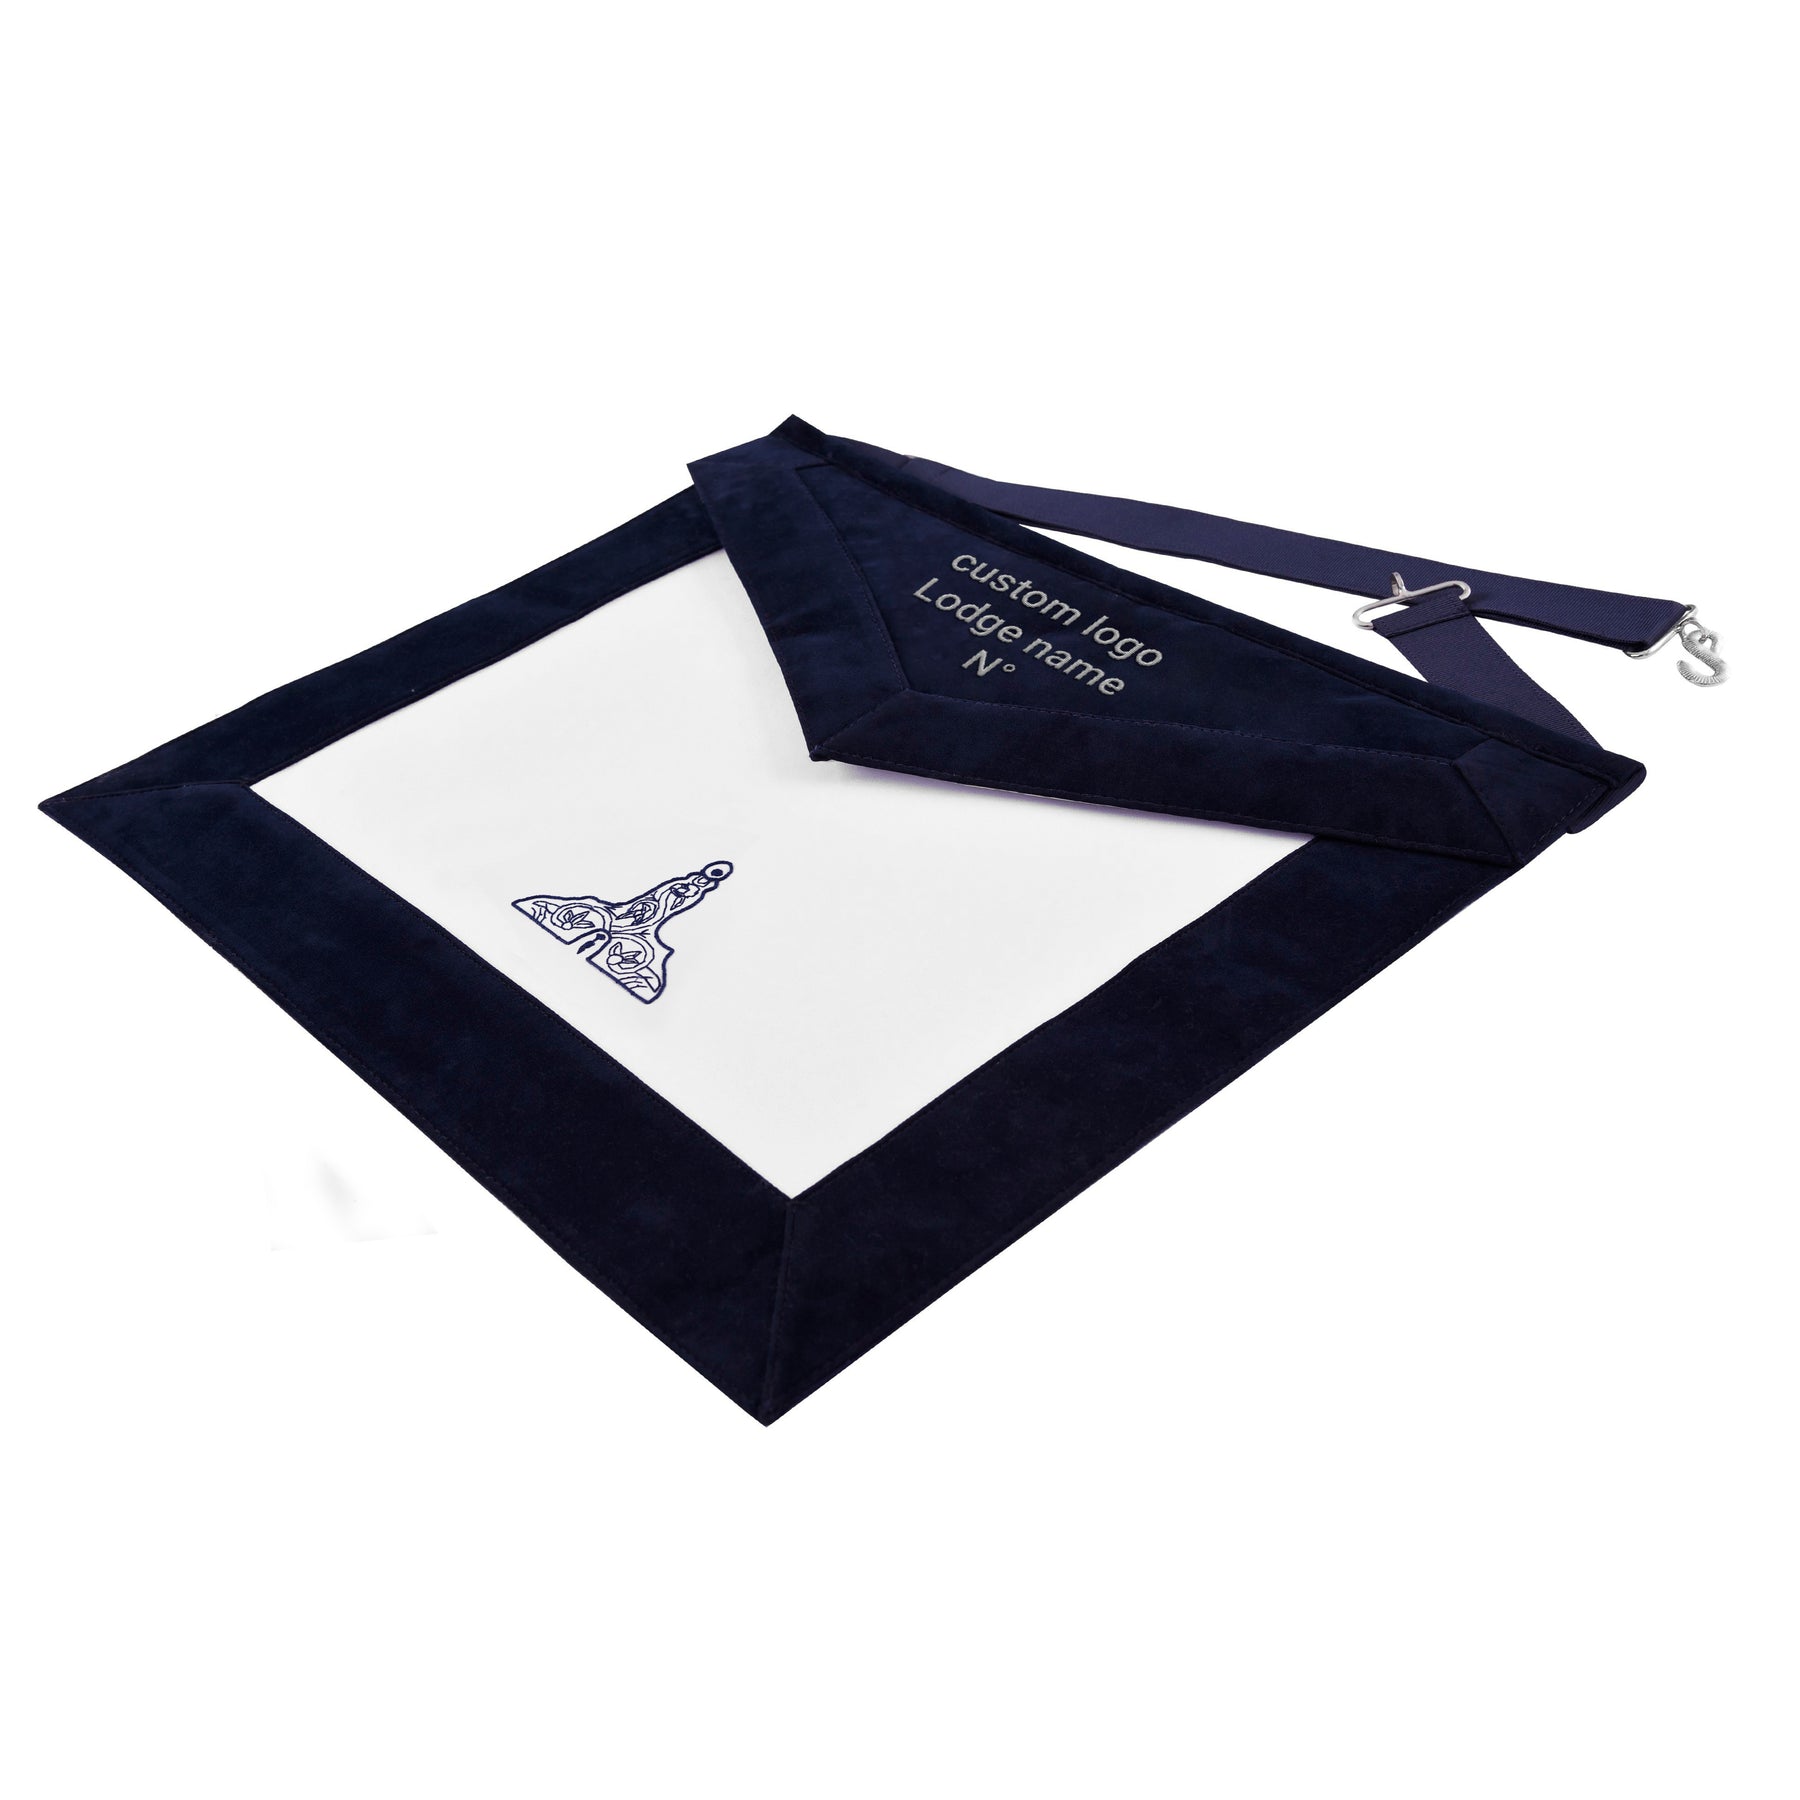 Senior Warden Blue Lodge Officer Apron -  Navy Velvet With Silver Embroidery Thread